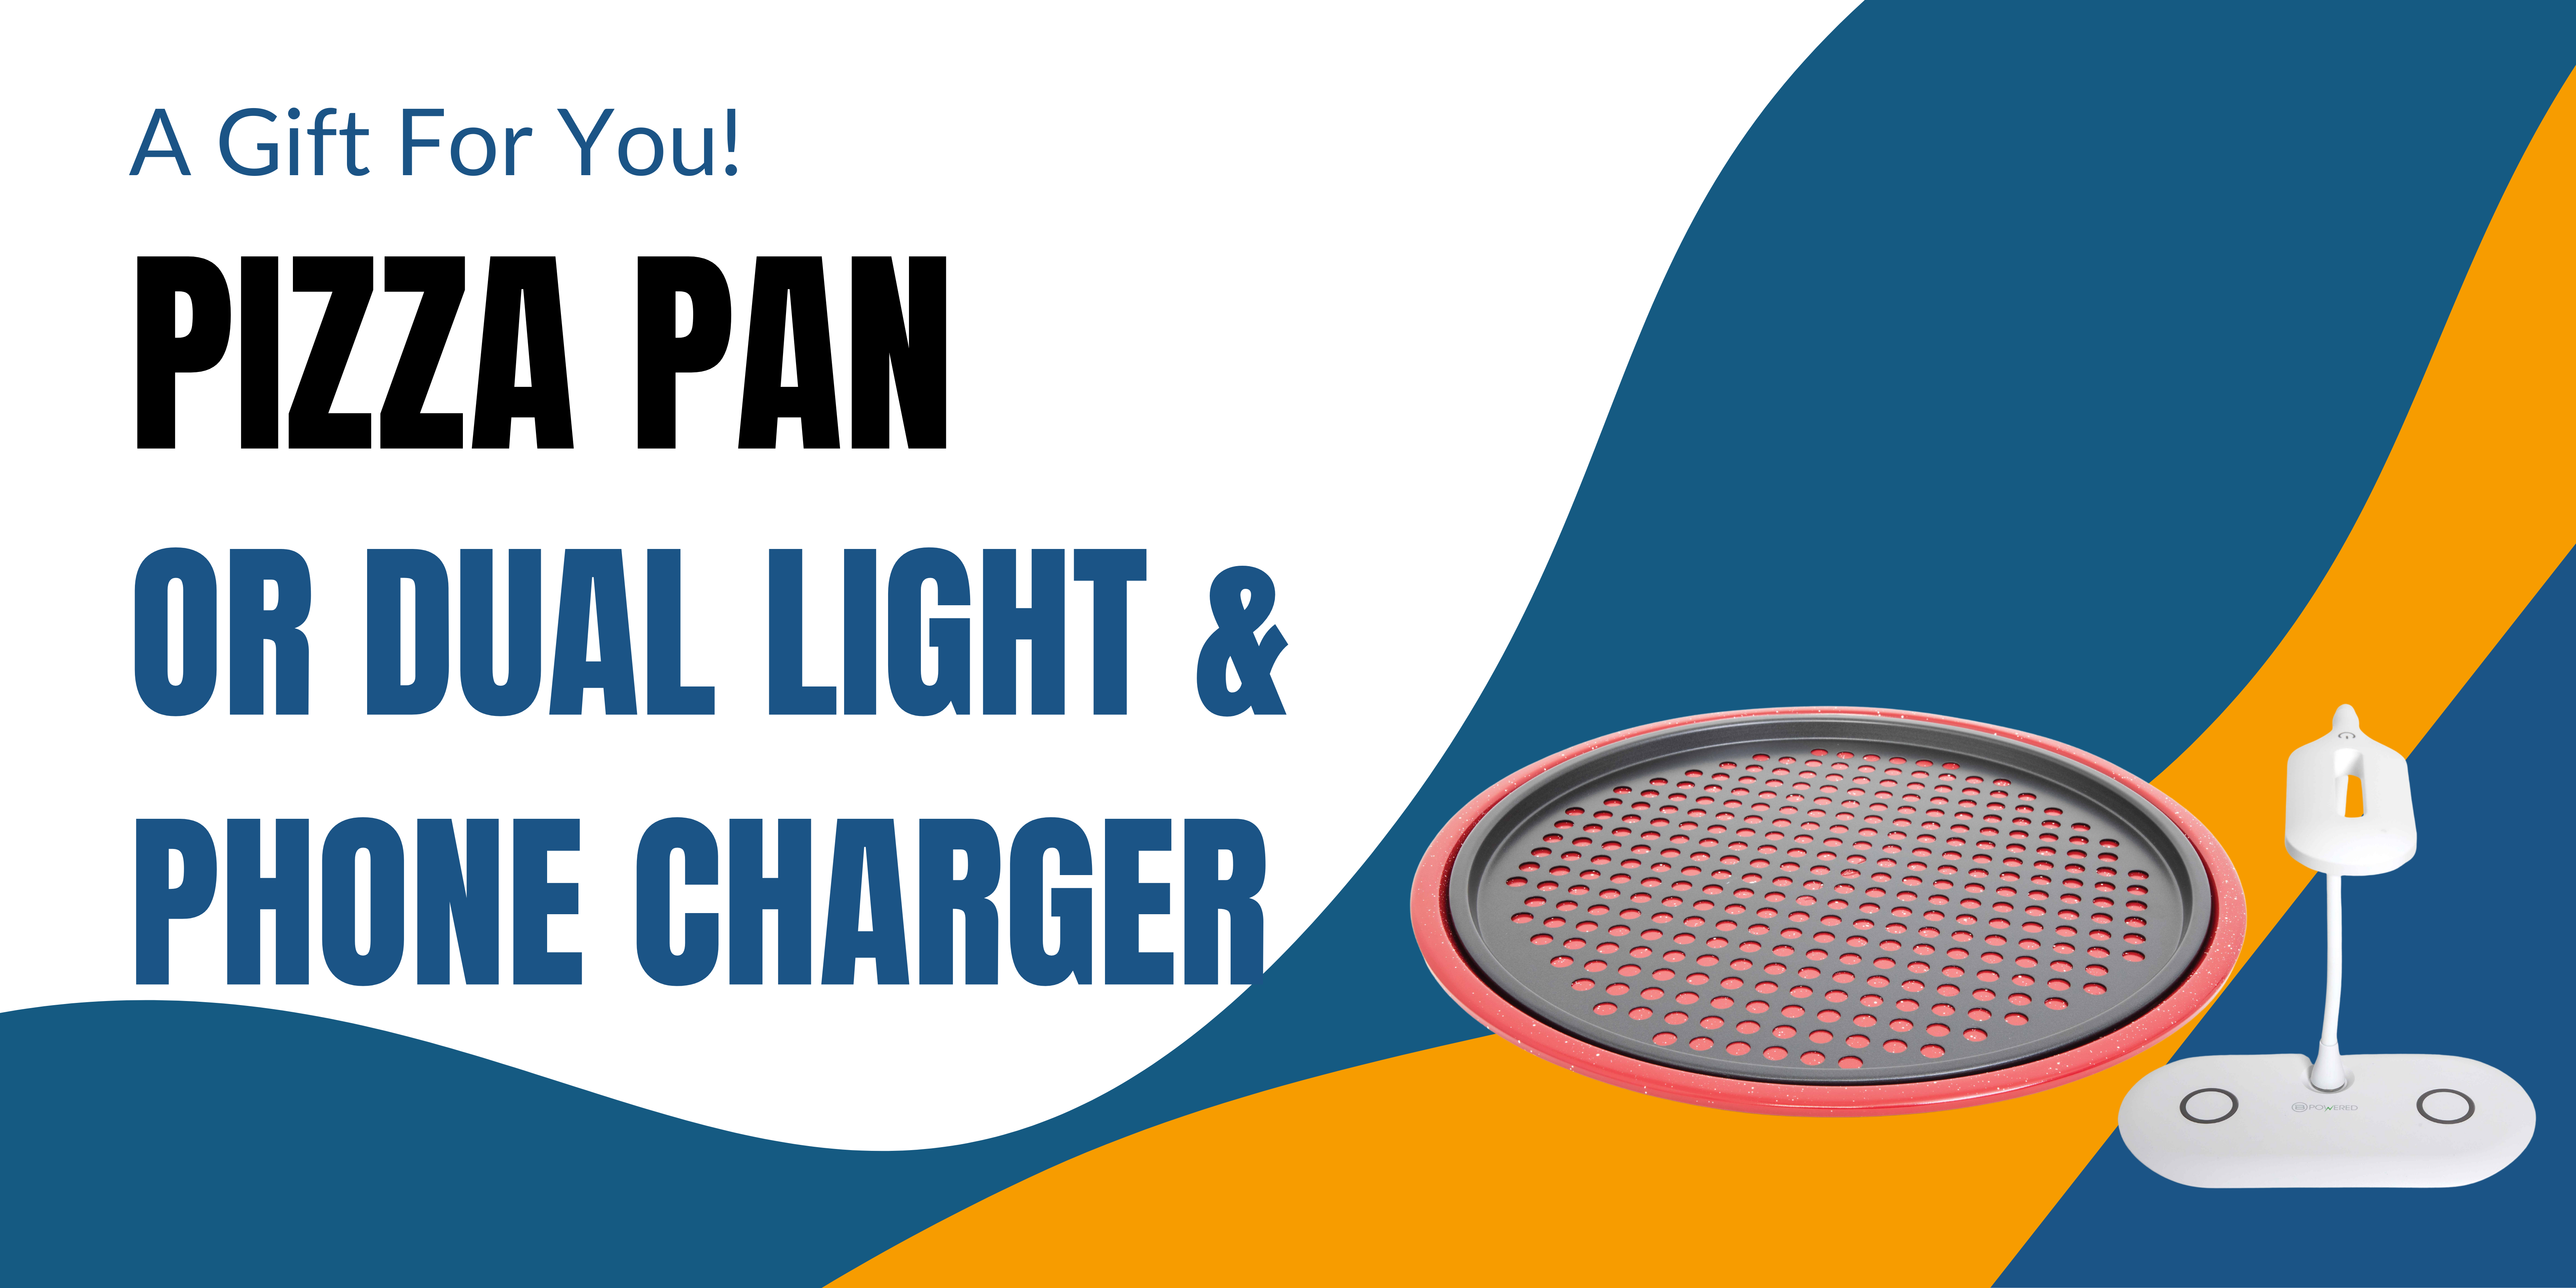 A gift for you! Pizza pan and dual light charger. 